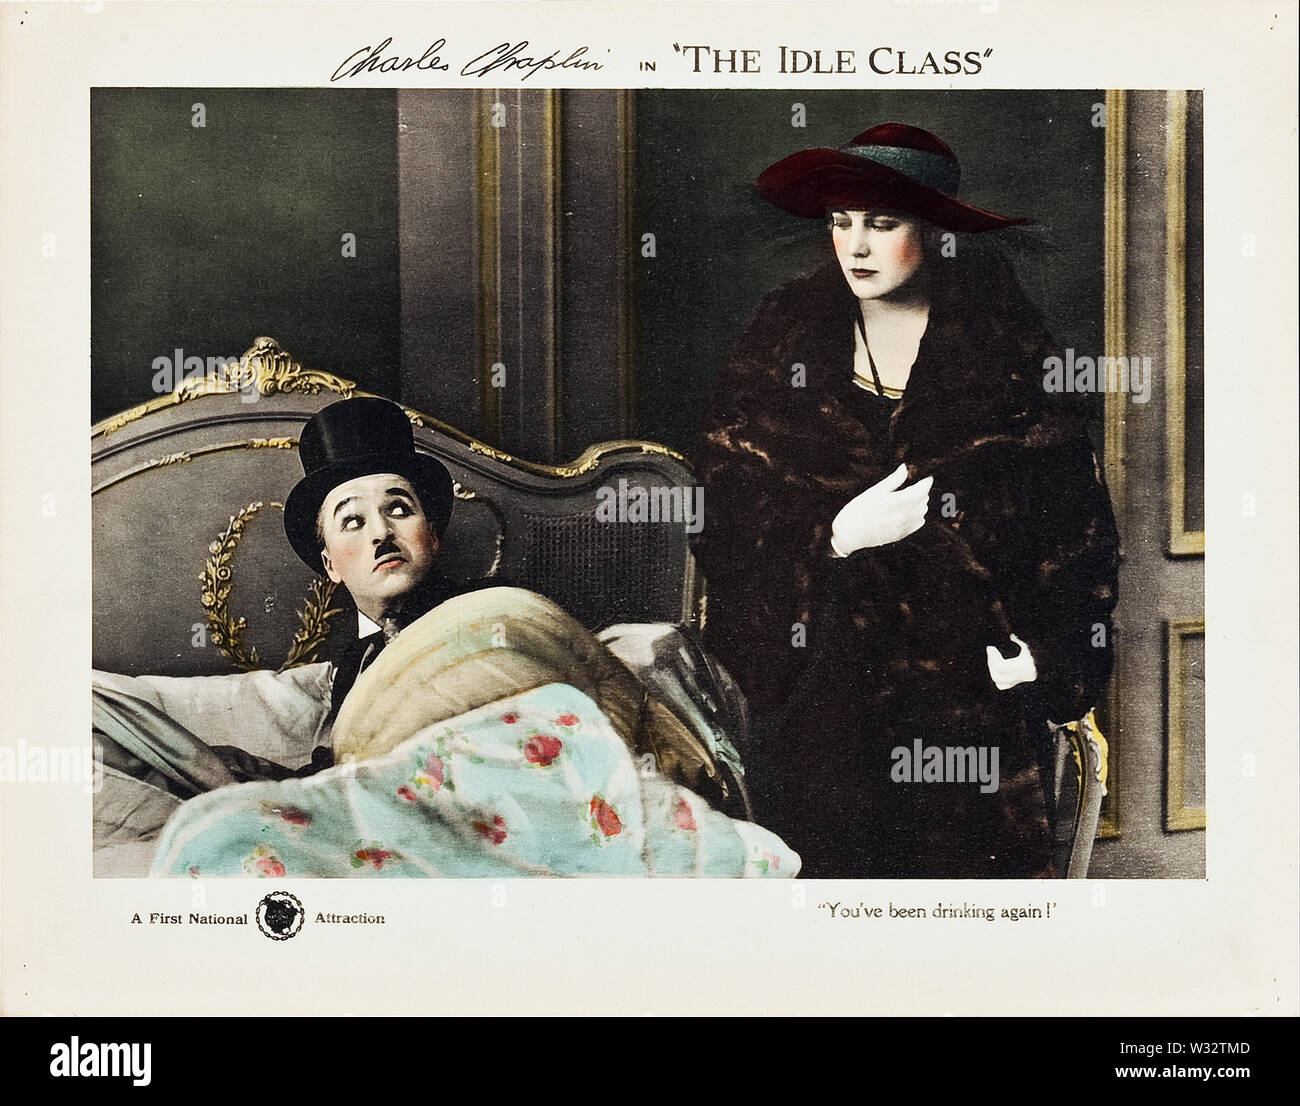 Lobby card for The Idle Class. Stock Photo